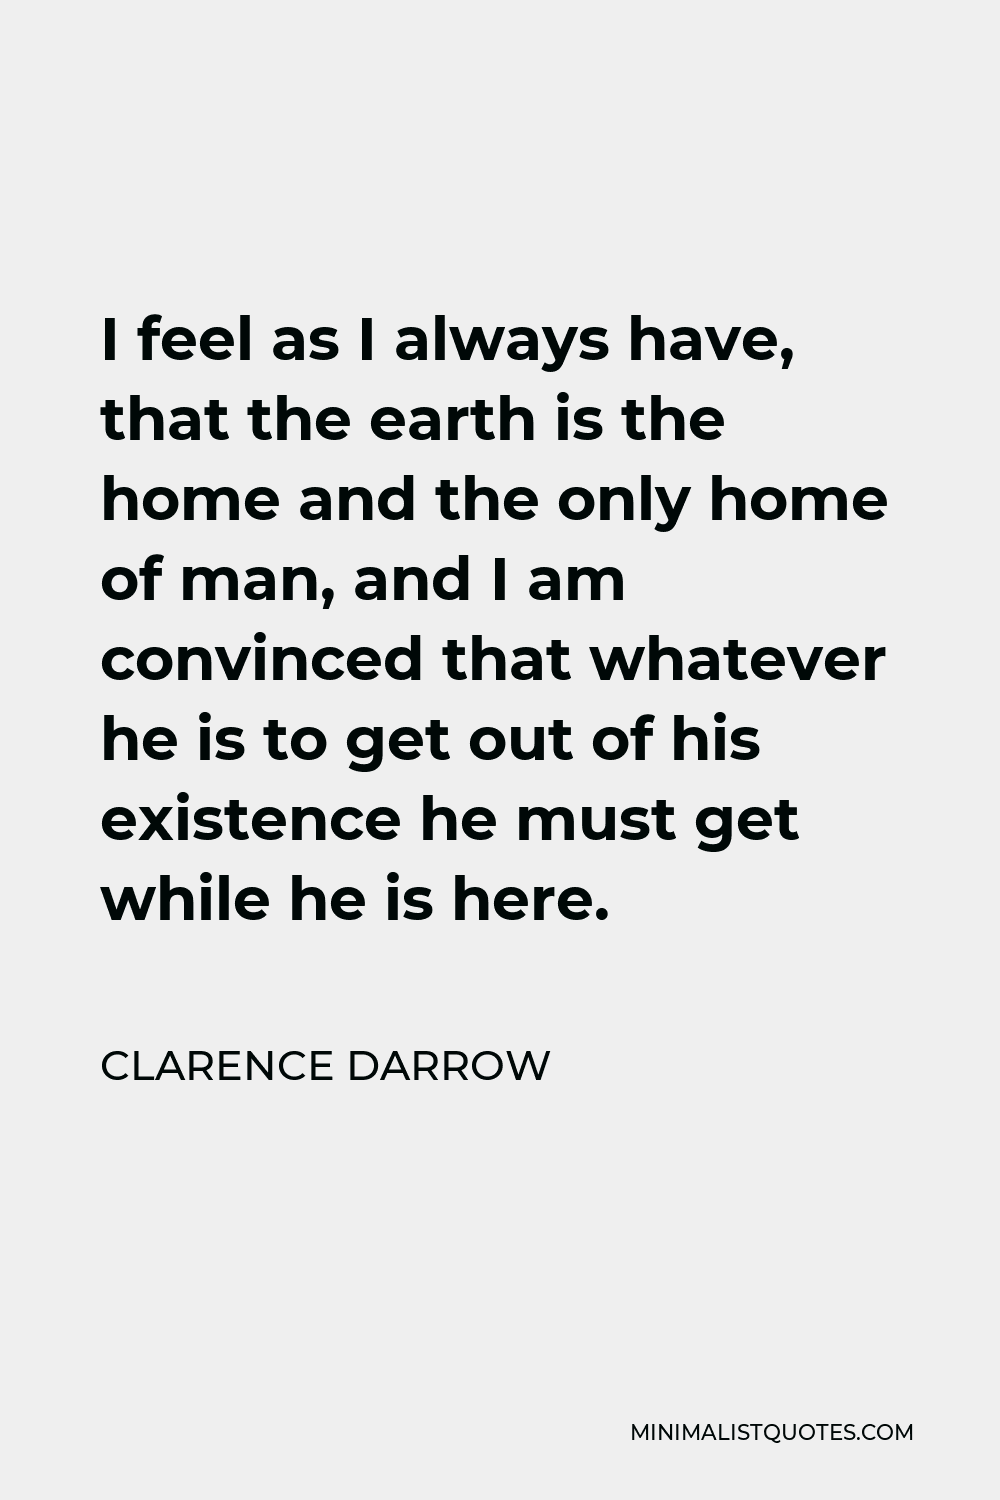 Clarence Darrow Quote - I feel as I always have, that the earth is the home and the only home of man, and I am convinced that whatever he is to get out of his existence he must get while he is here.